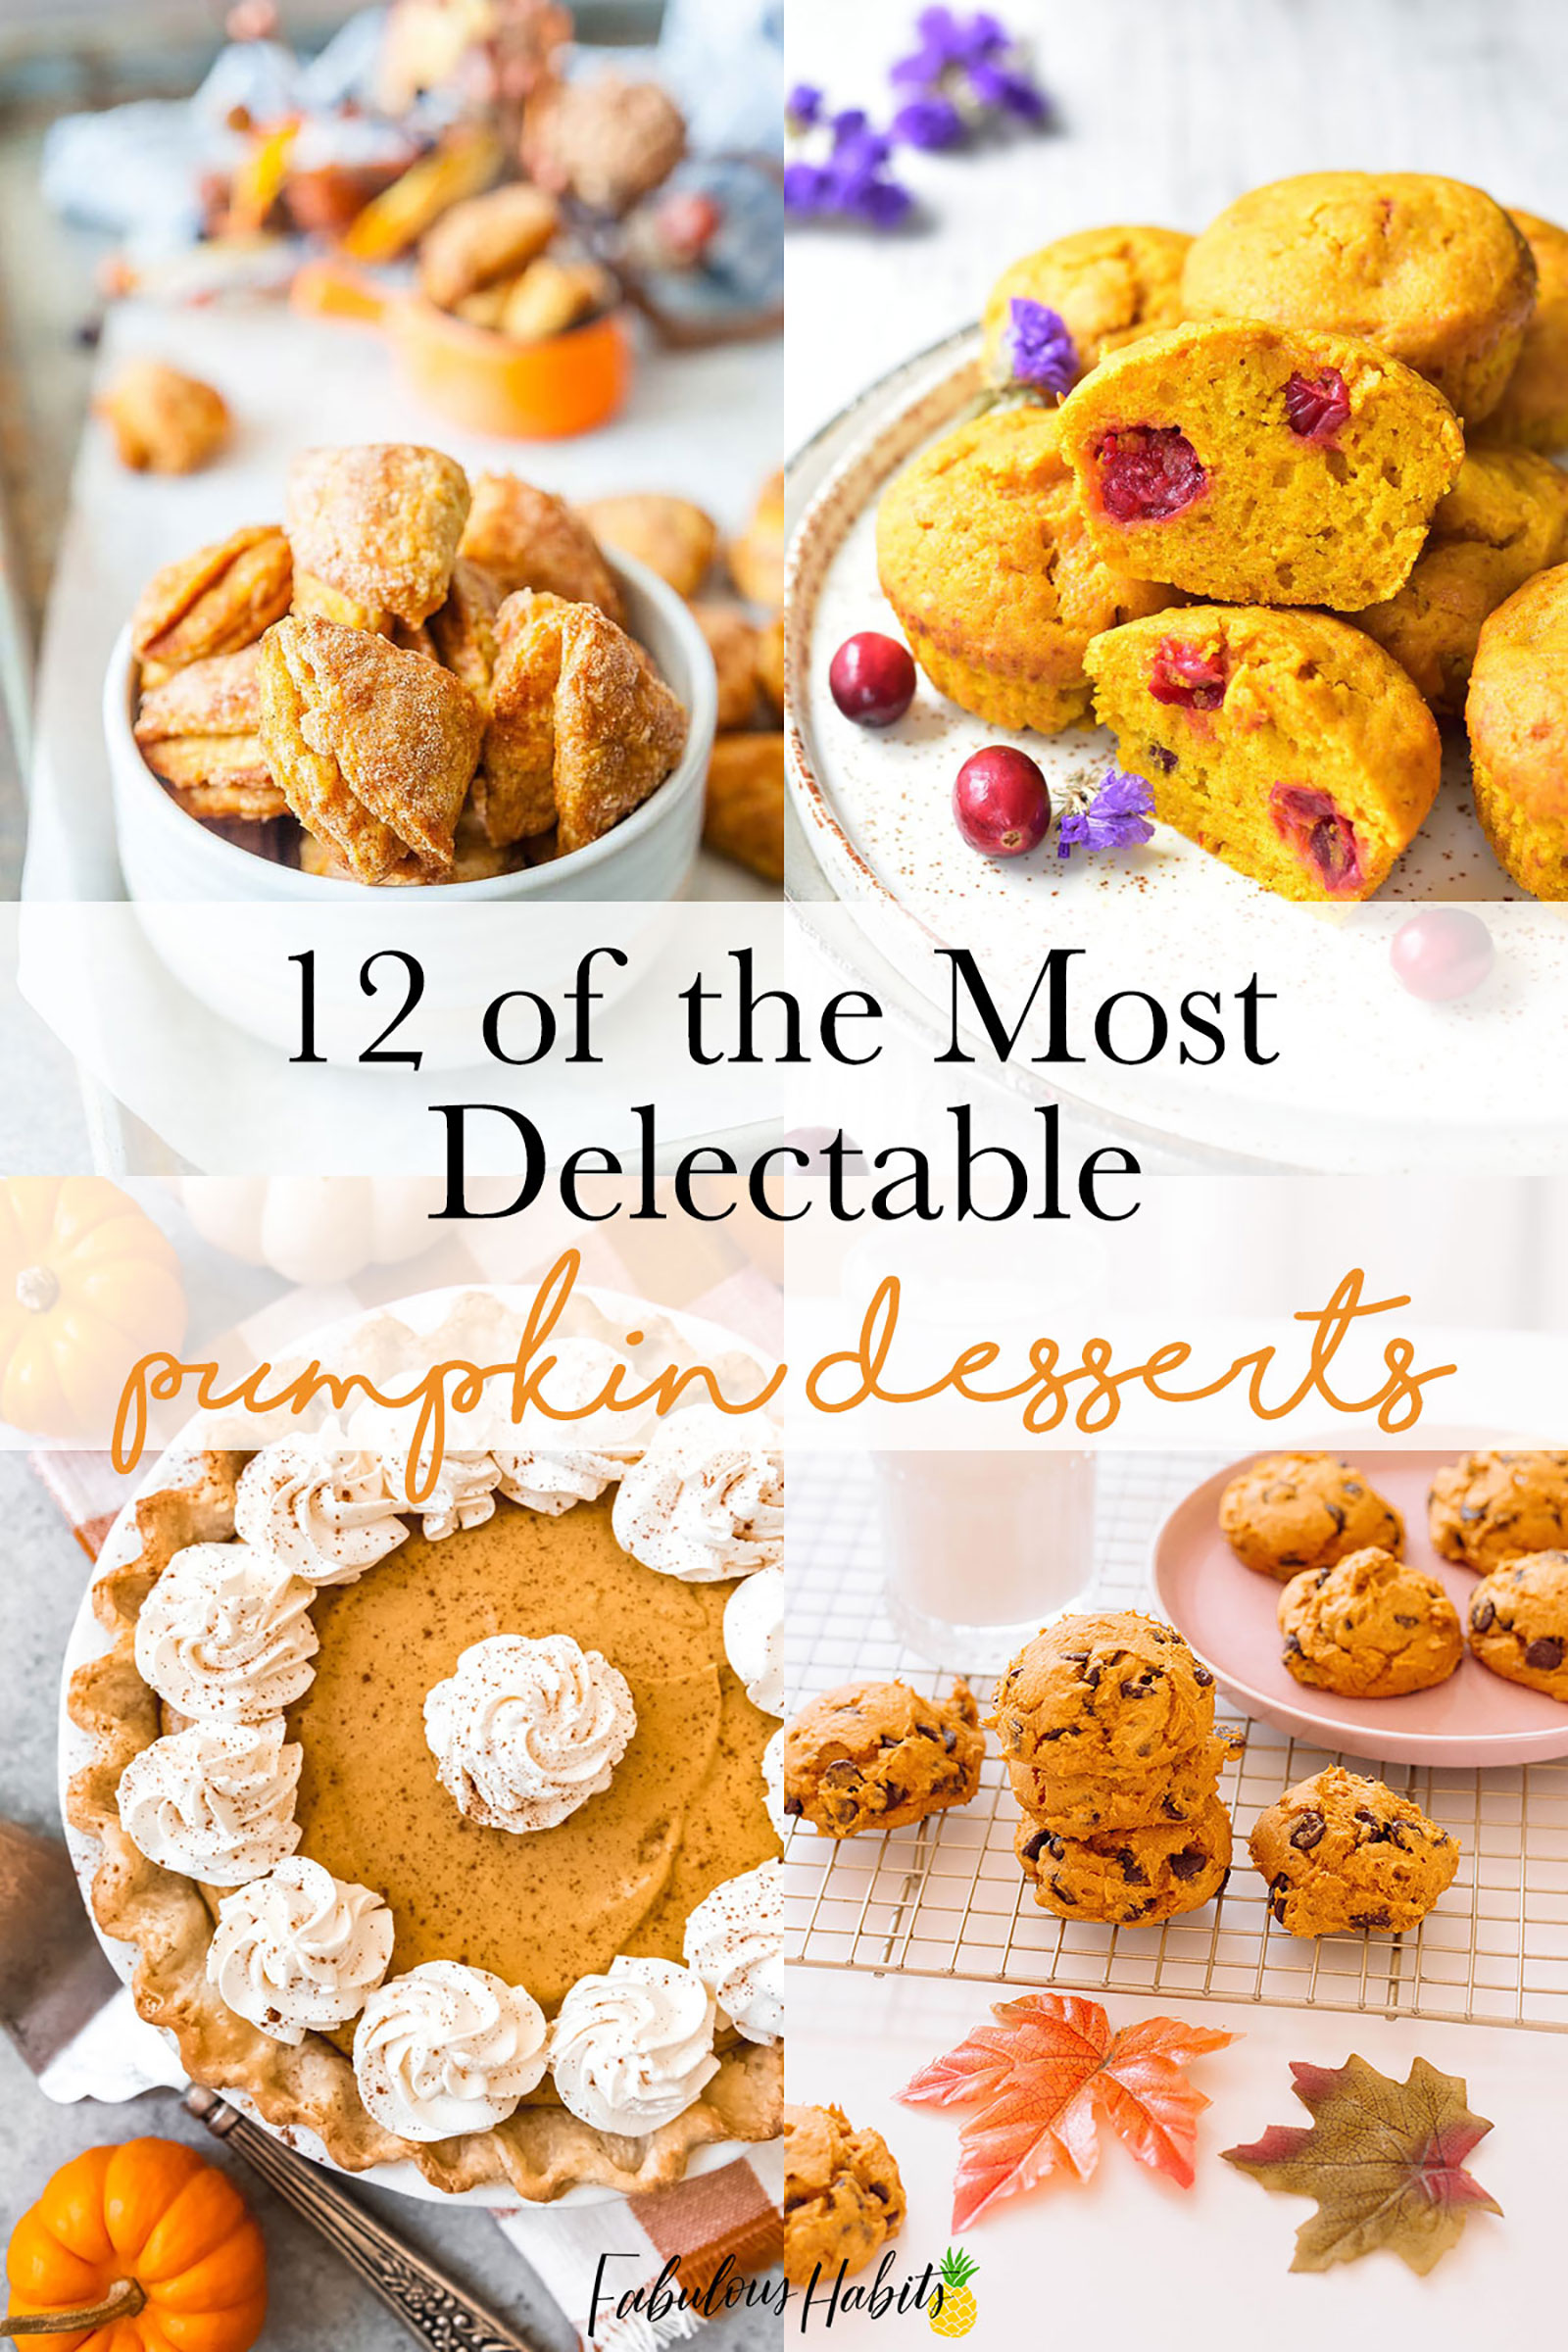 12 of the Most Delectable Pumpkin Desserts